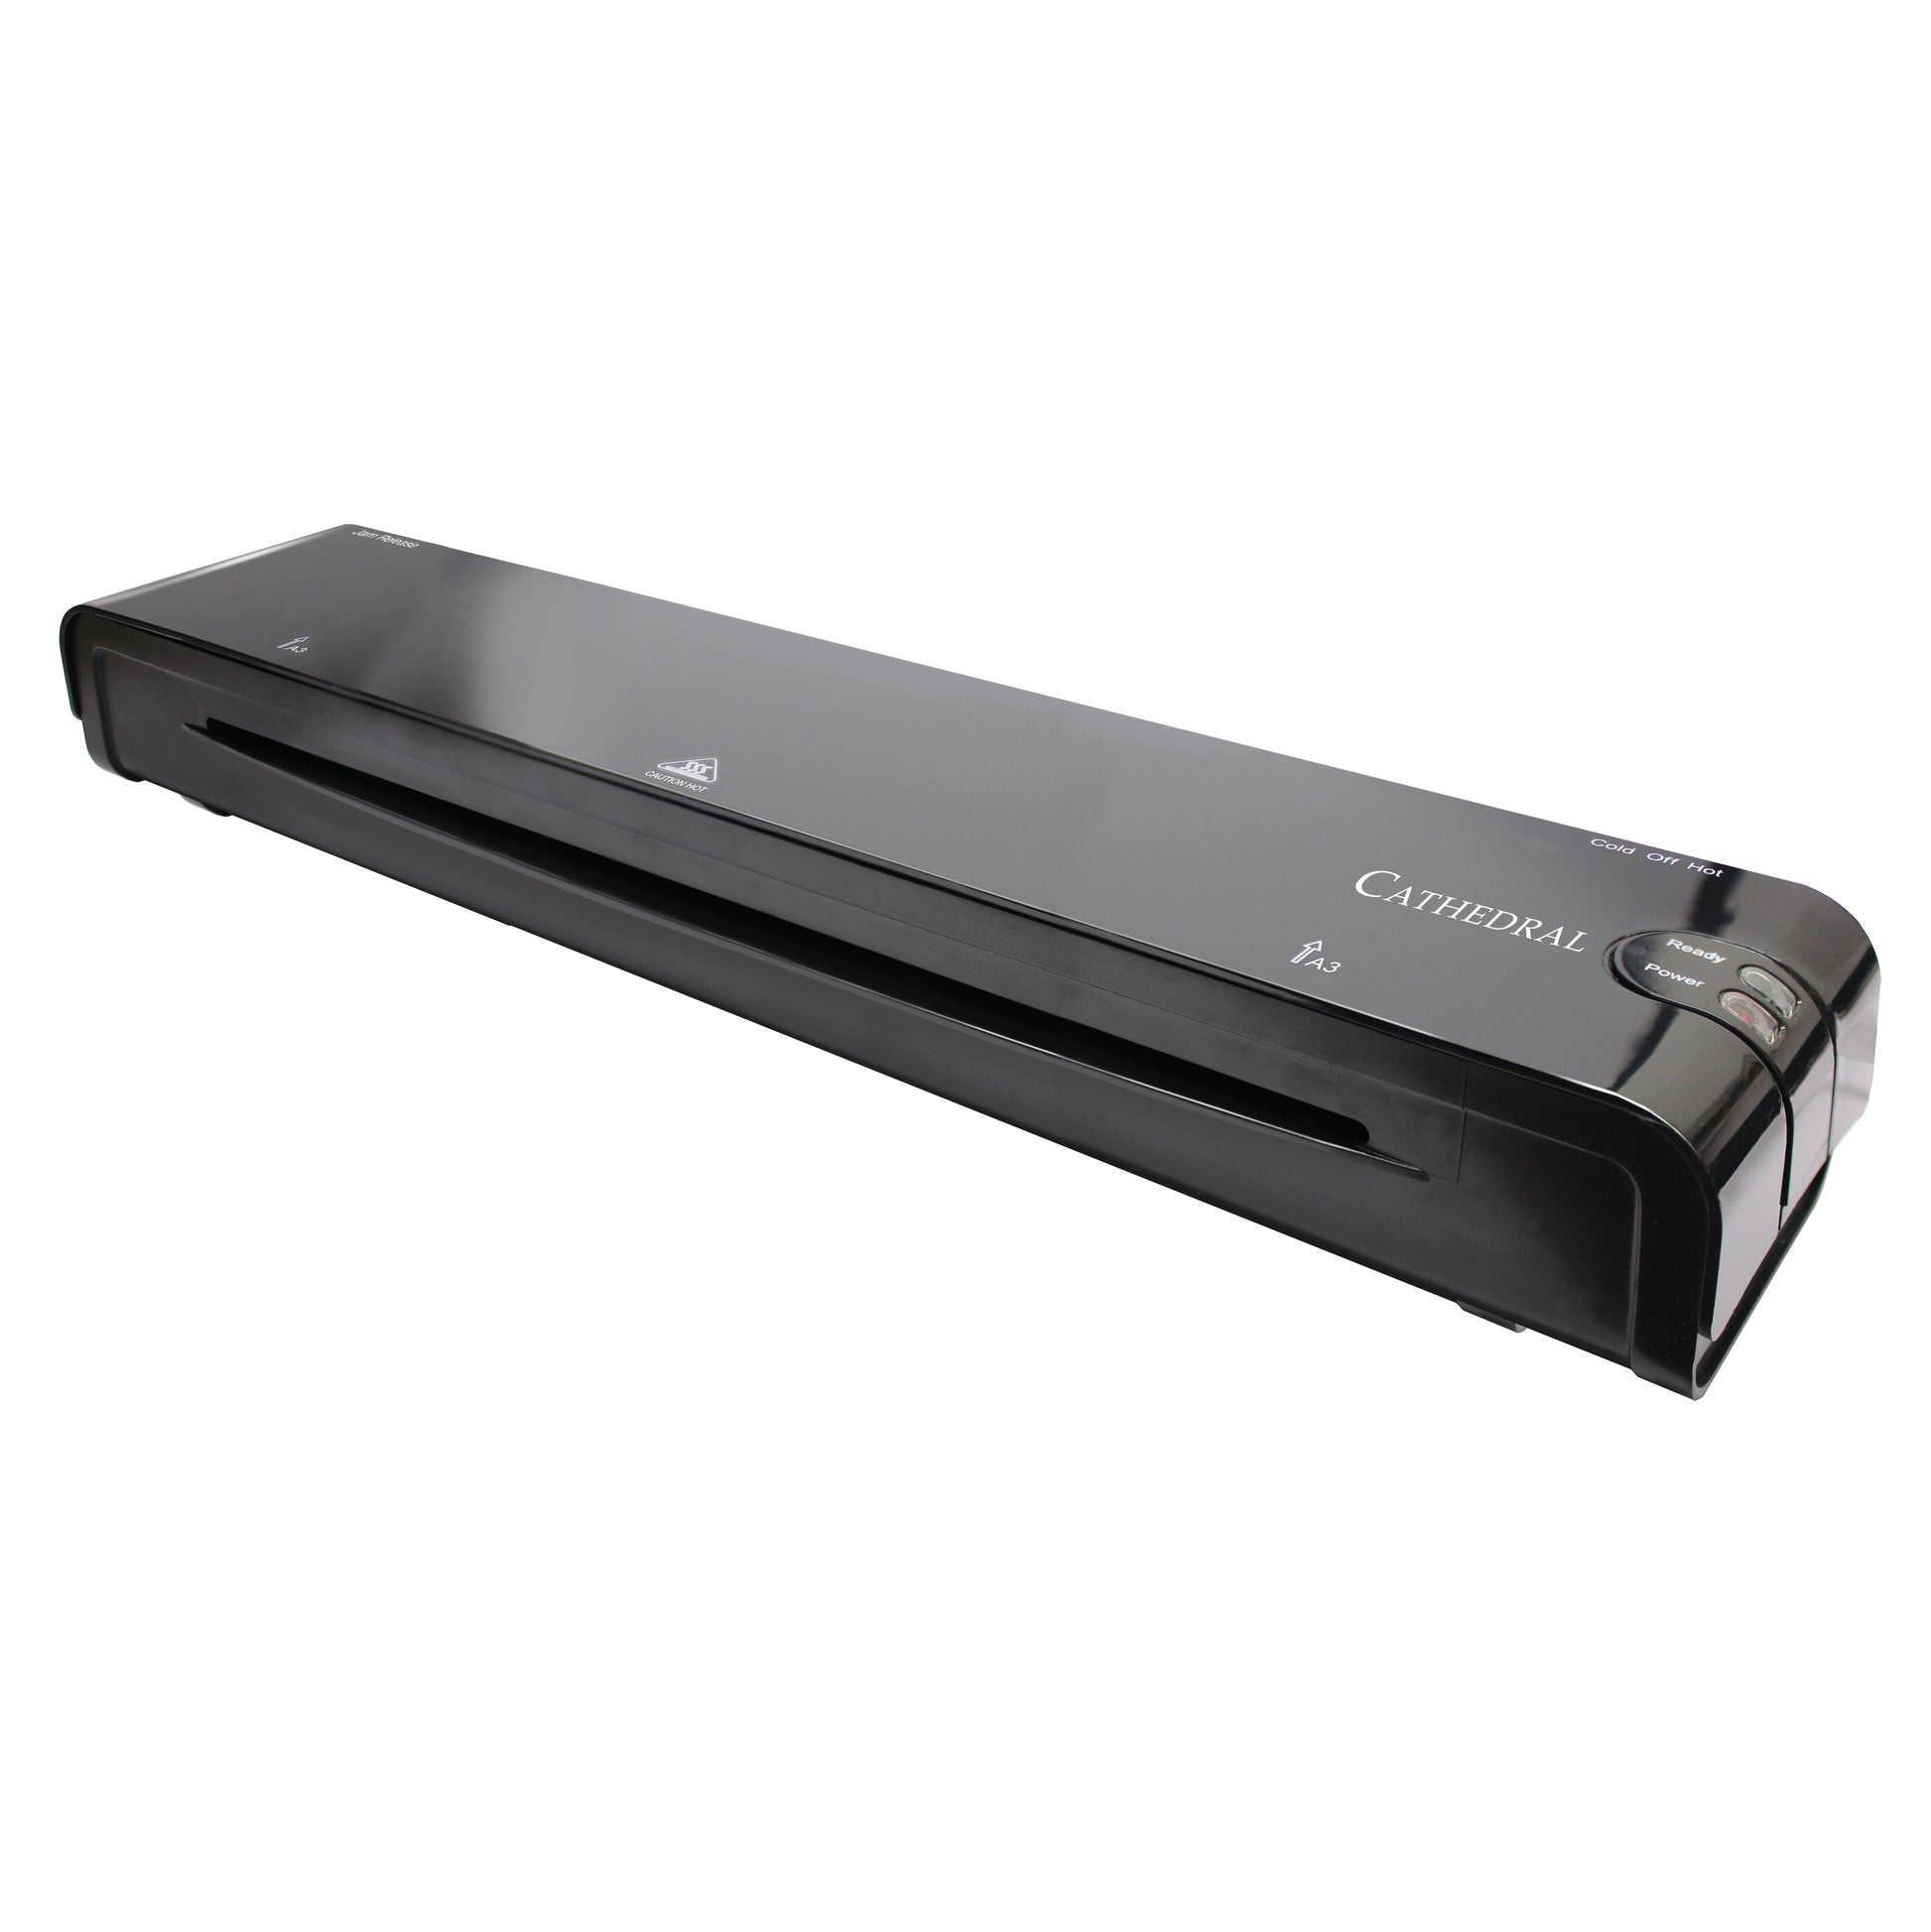 Black Cathedral Products A3 laminator with fast warm-up and jam release features, showcasing a sleek design that accommodates A3 size documents for home or office laminating needs.